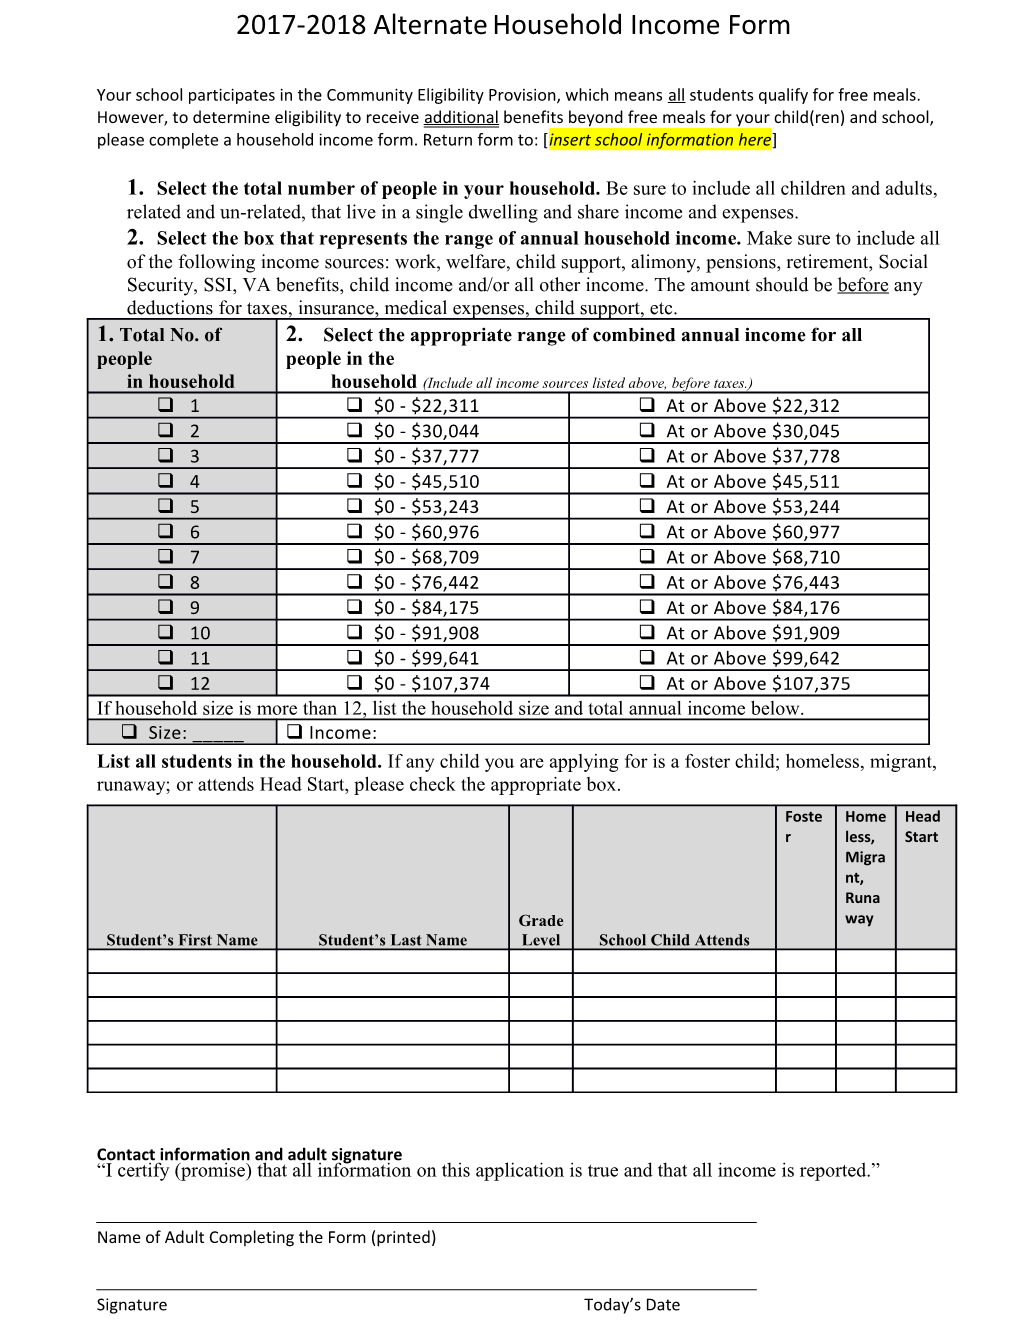 2017-2018 Alternate Household Income Form, Page 2